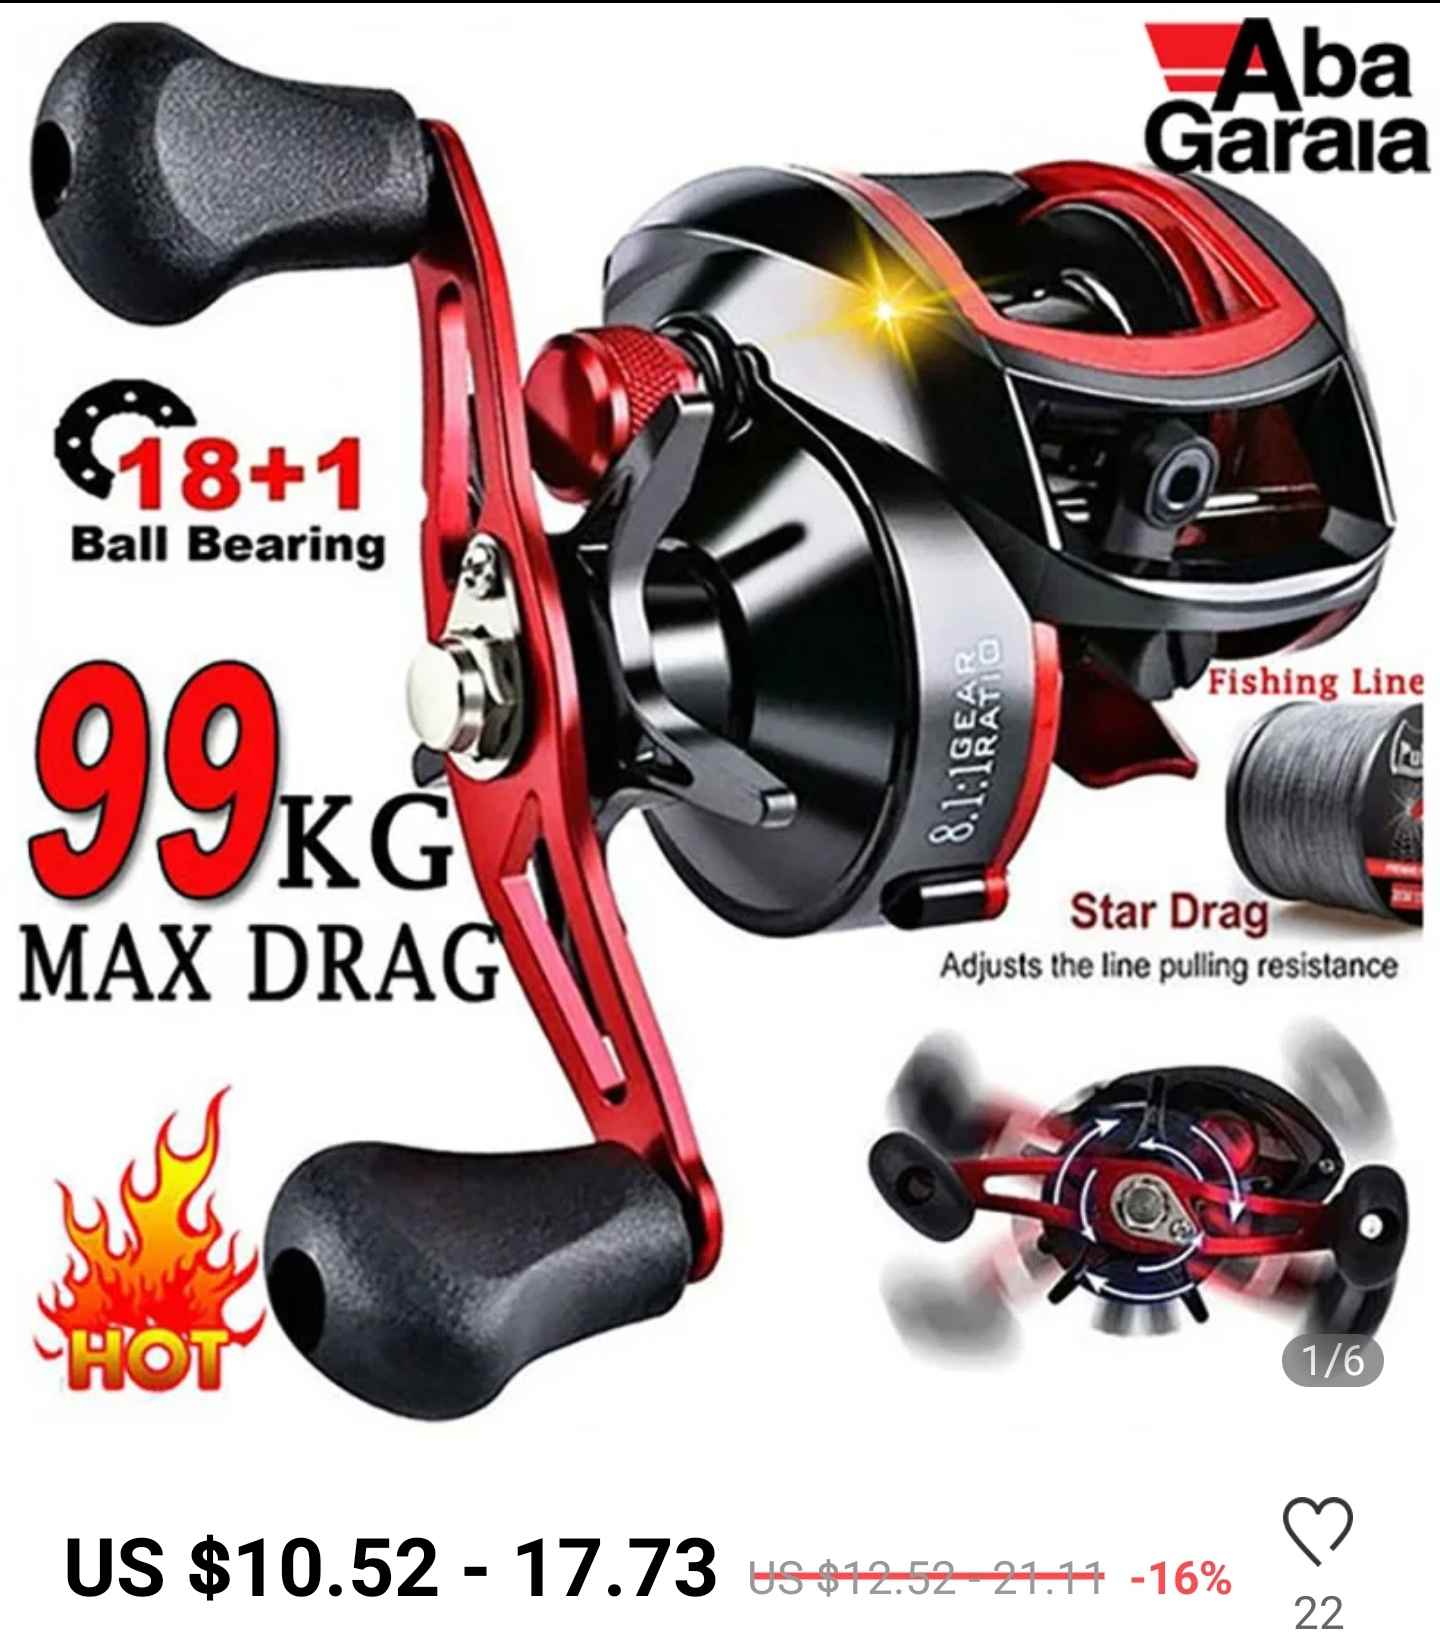 Anybody tried these reels? - Fishing Rods, Reels, Line, and Knots